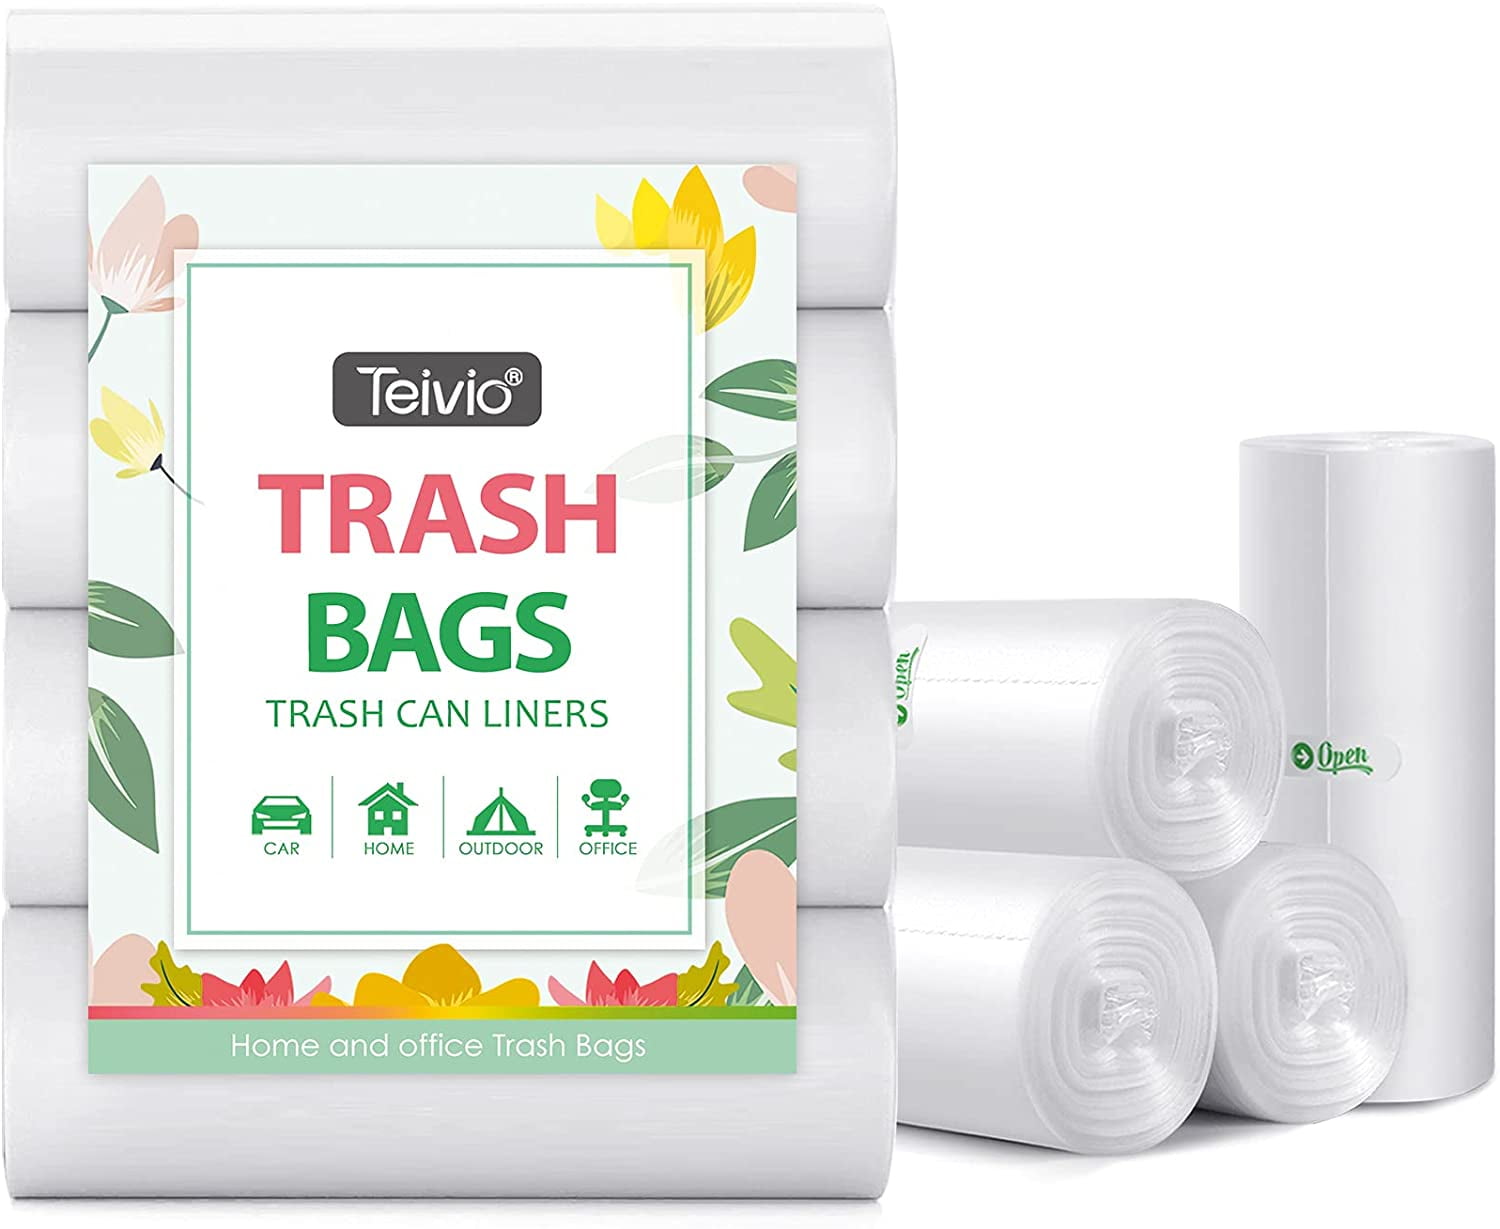 2.6 Gallon 165 Counts Strong Trash Bags Garbage Bags by Teivio